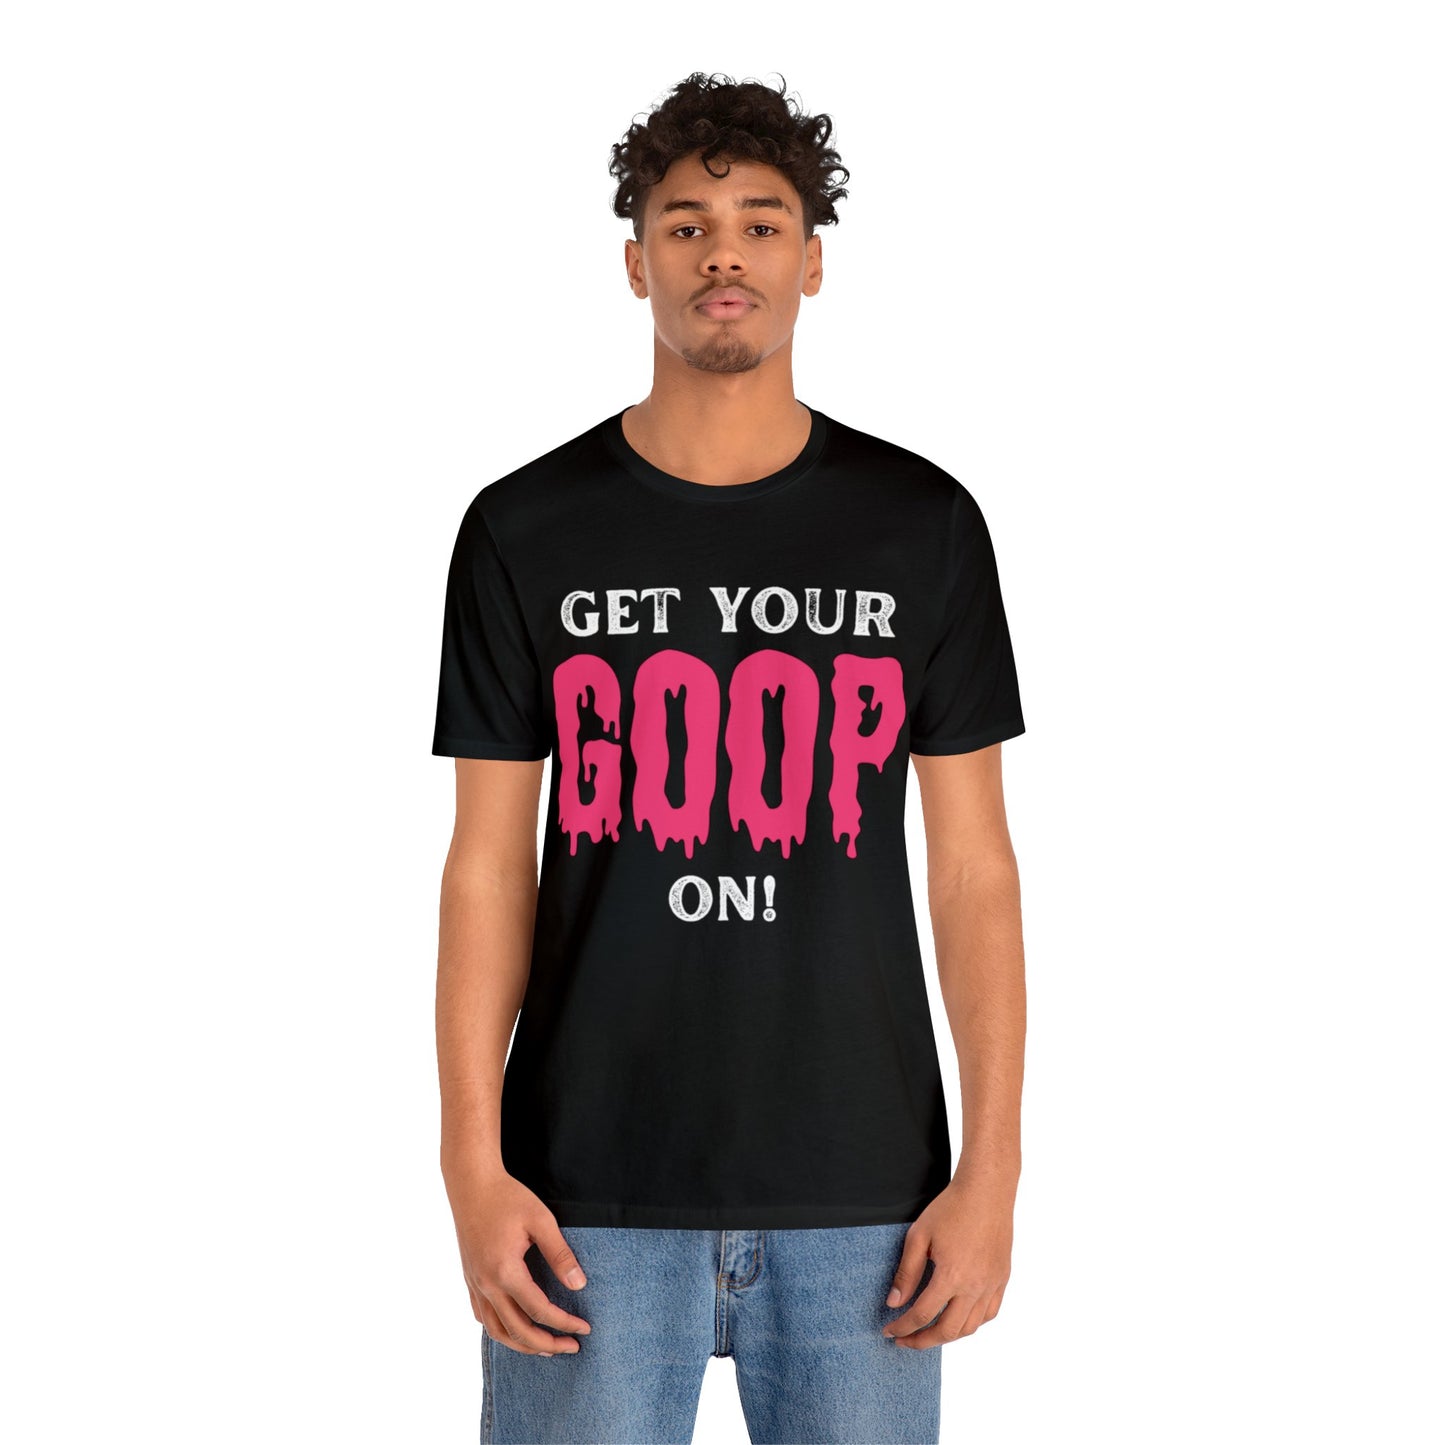 Get Your Goop On T-Shirt